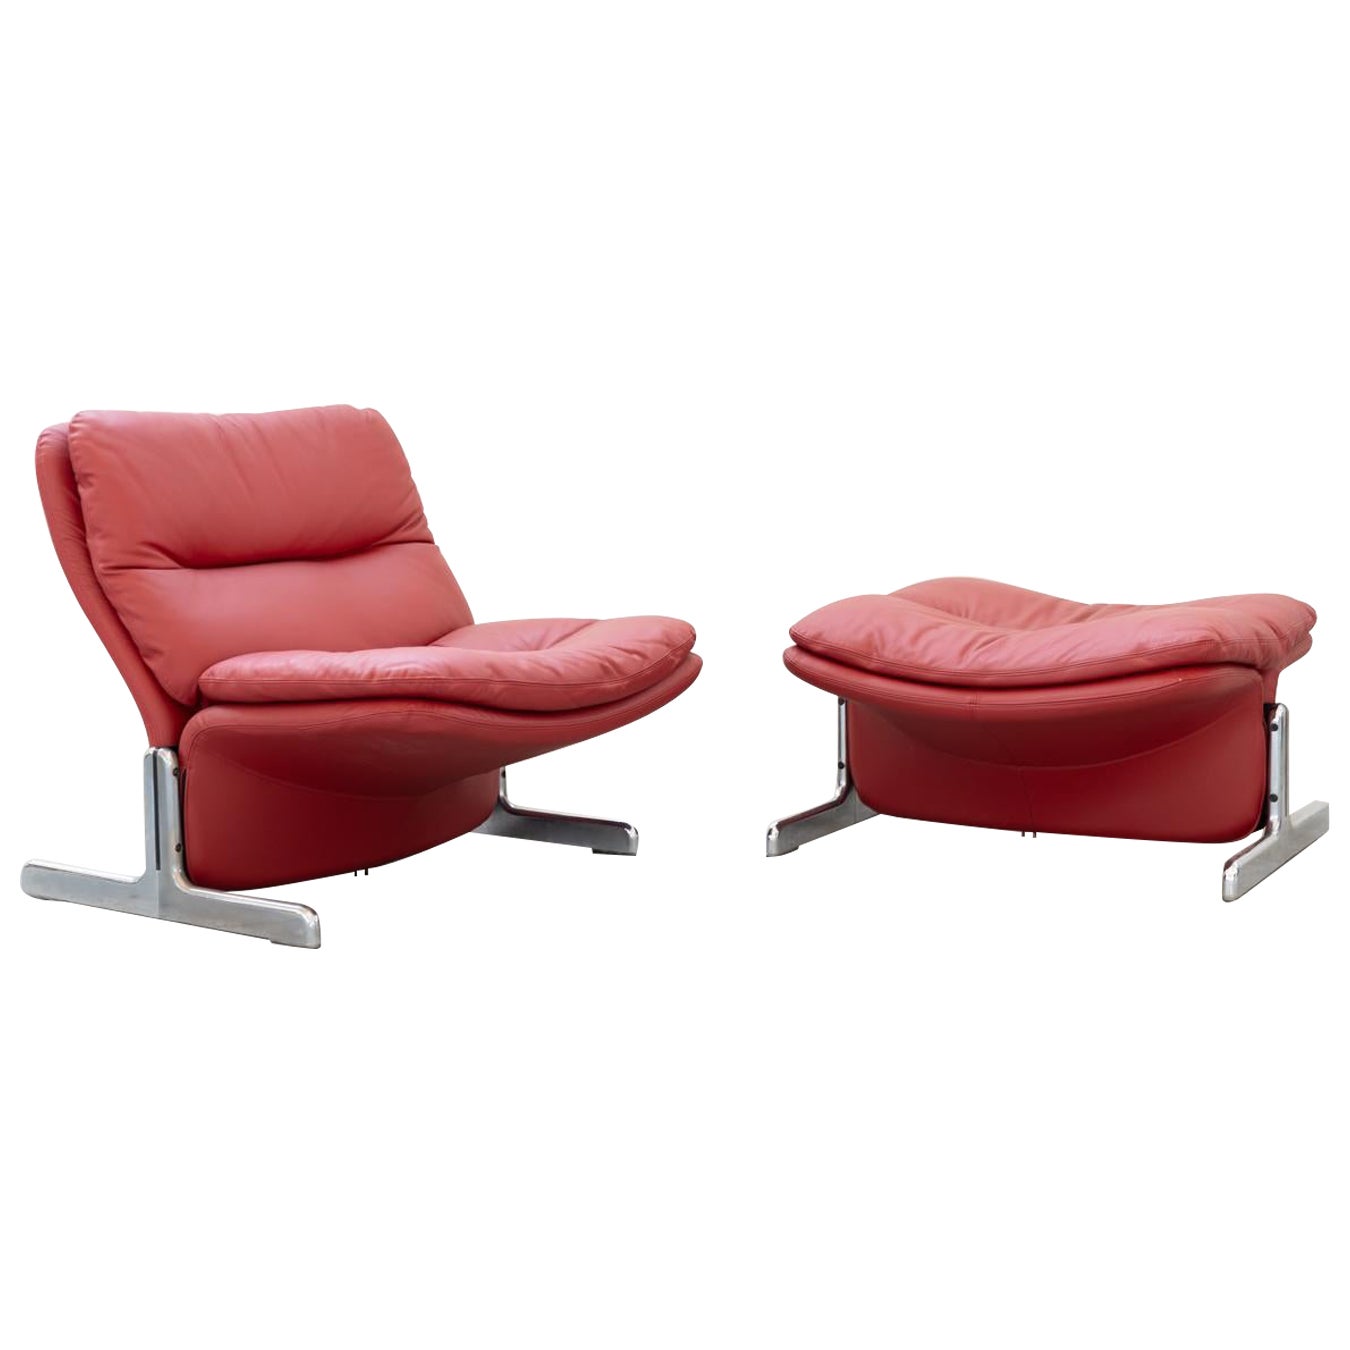 Red leather armchair and footstool, Vitelli and Ammannati, for Brunati 70/80s